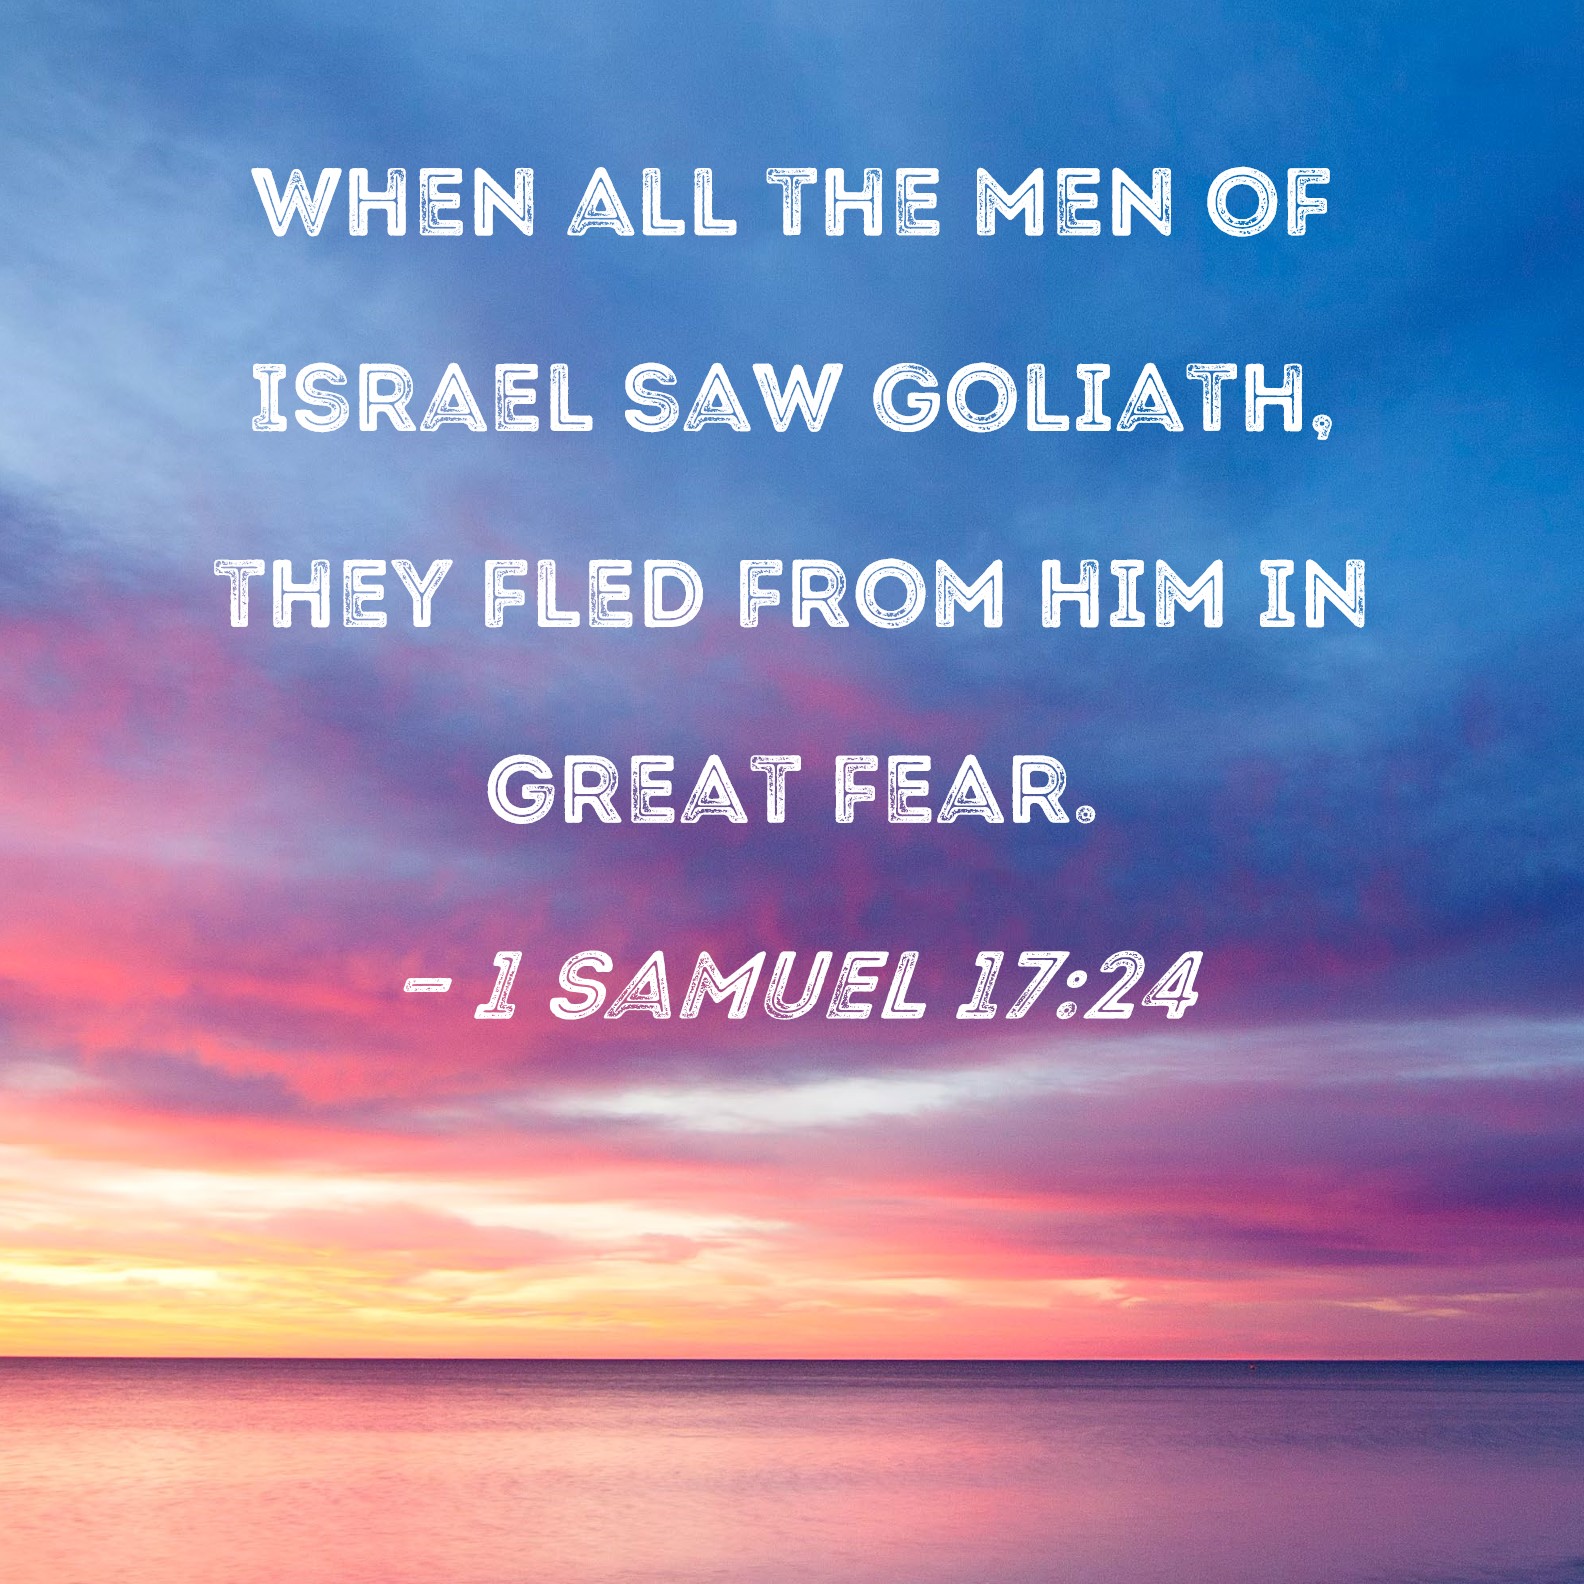 1 Samuel 17:24 When all the men of Israel saw Goliath, they fled from ...